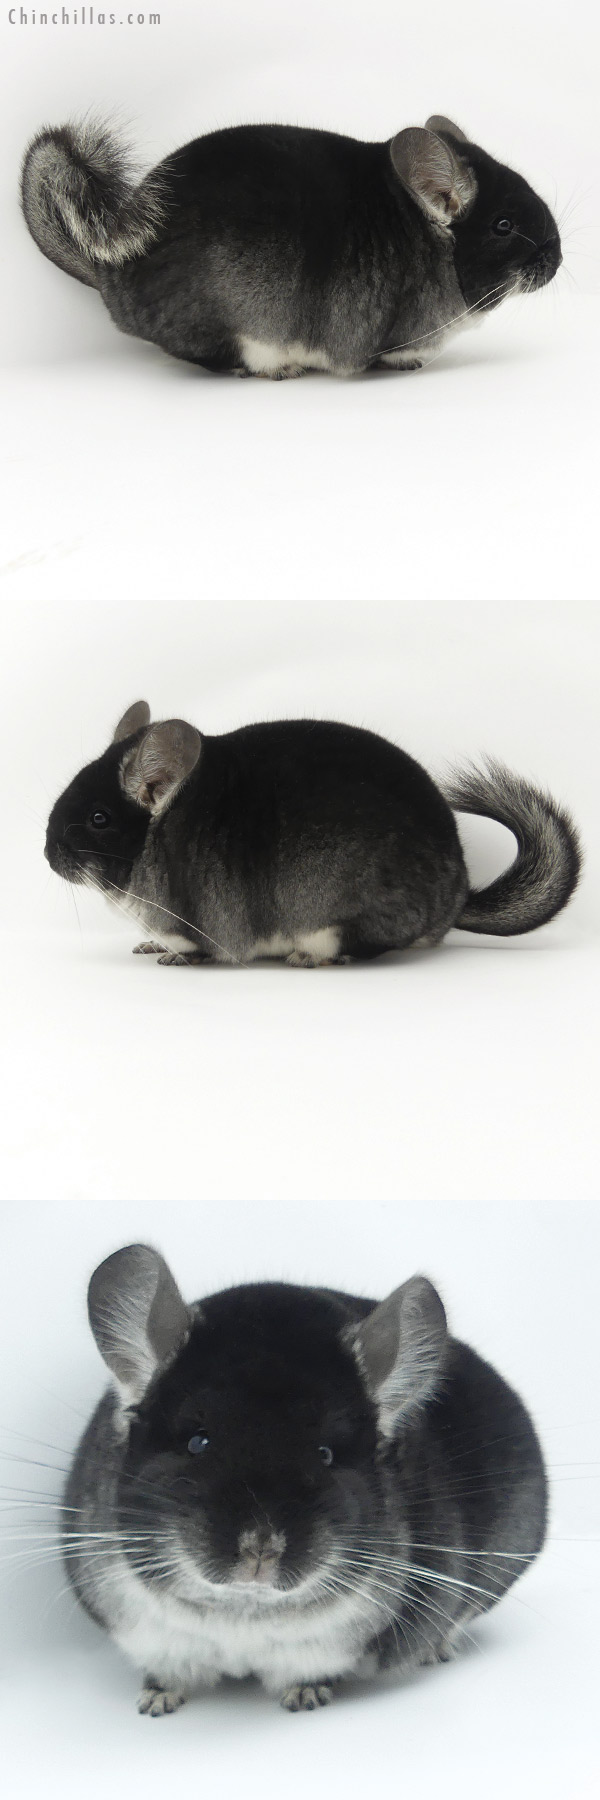 Chinchilla or related item offered for sale or export on Chinchillas.com - 20009 Herd Improvement Quality Black Velvet Male Chinchilla